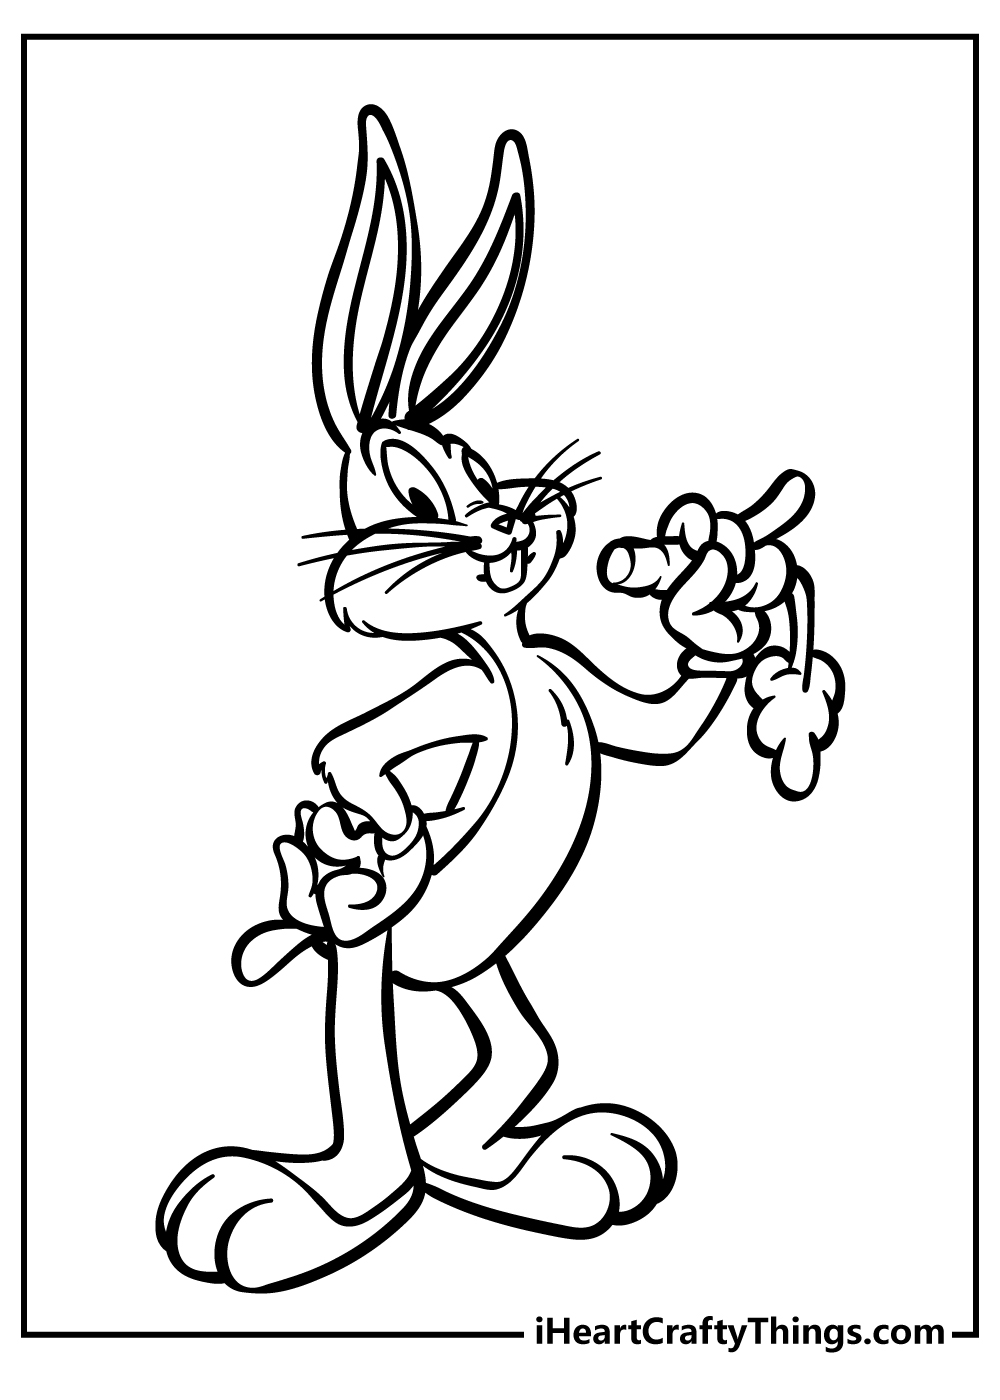 Looney Tunes Coloring Book free printable